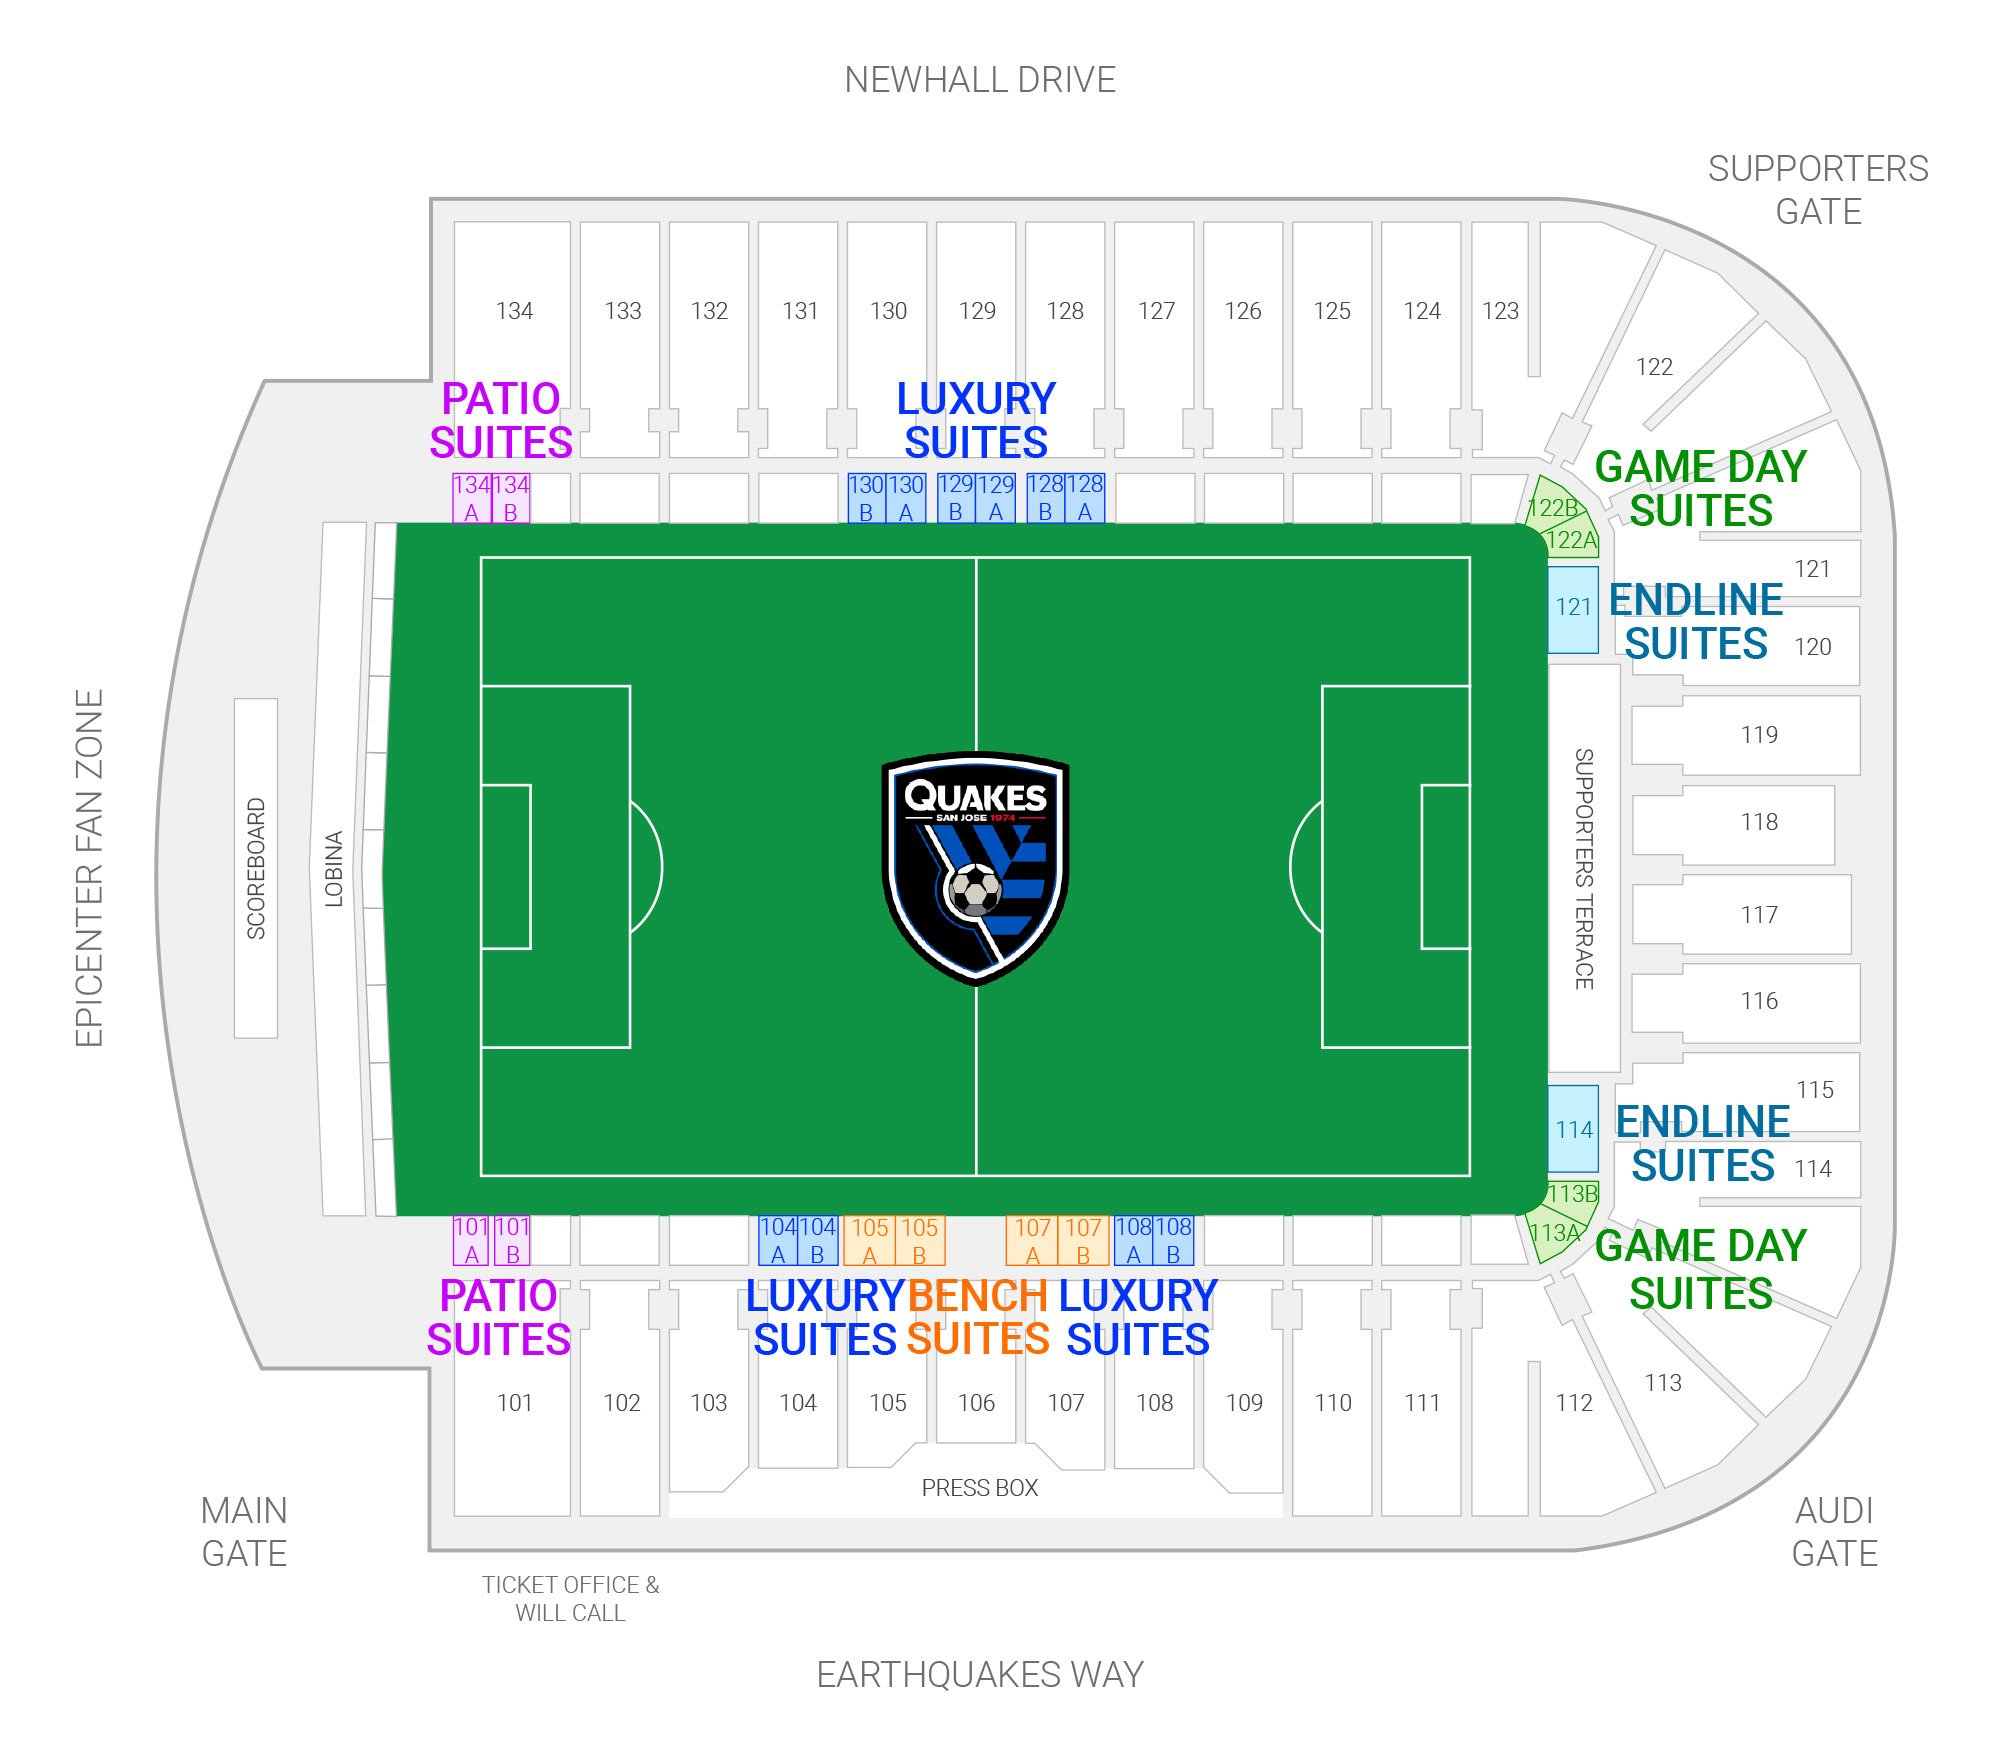 PayPal Park (Formerly Avaya Stadium) / San Jose Earthquakes Suite Map and Seating Chart